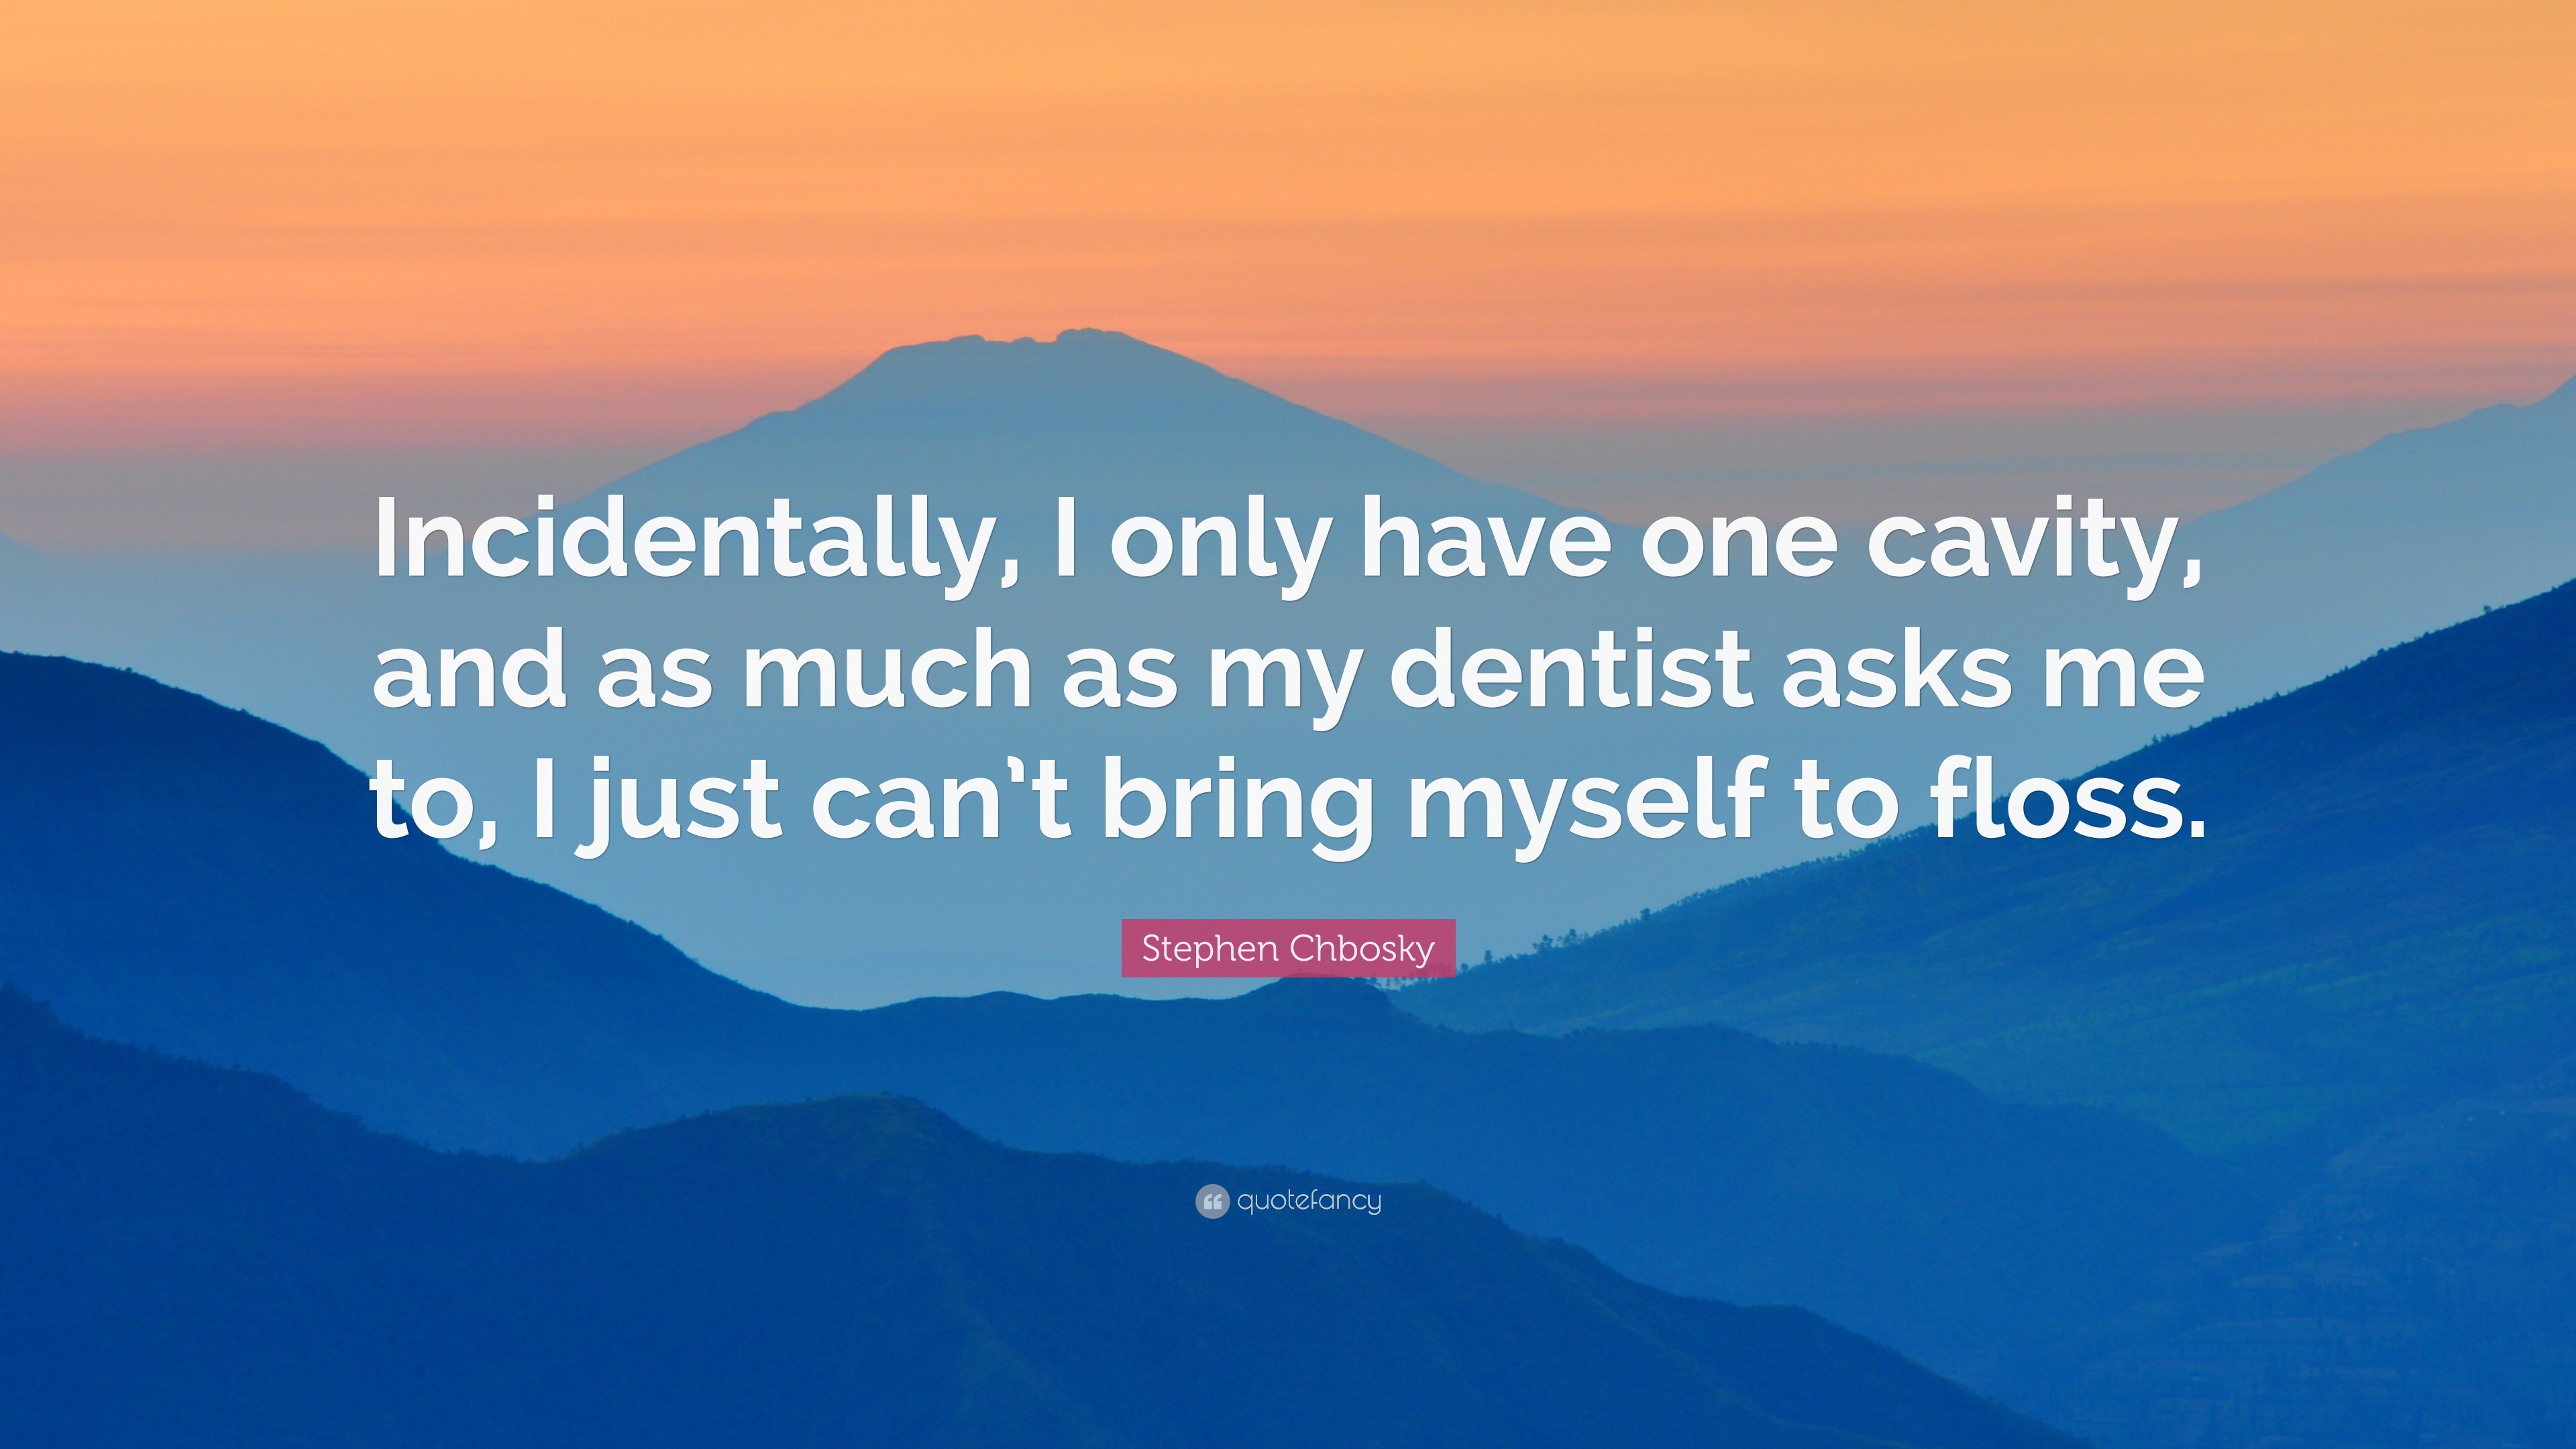 Stephen Chbosky Quote: “Incidentally, I only have one cavity, and as